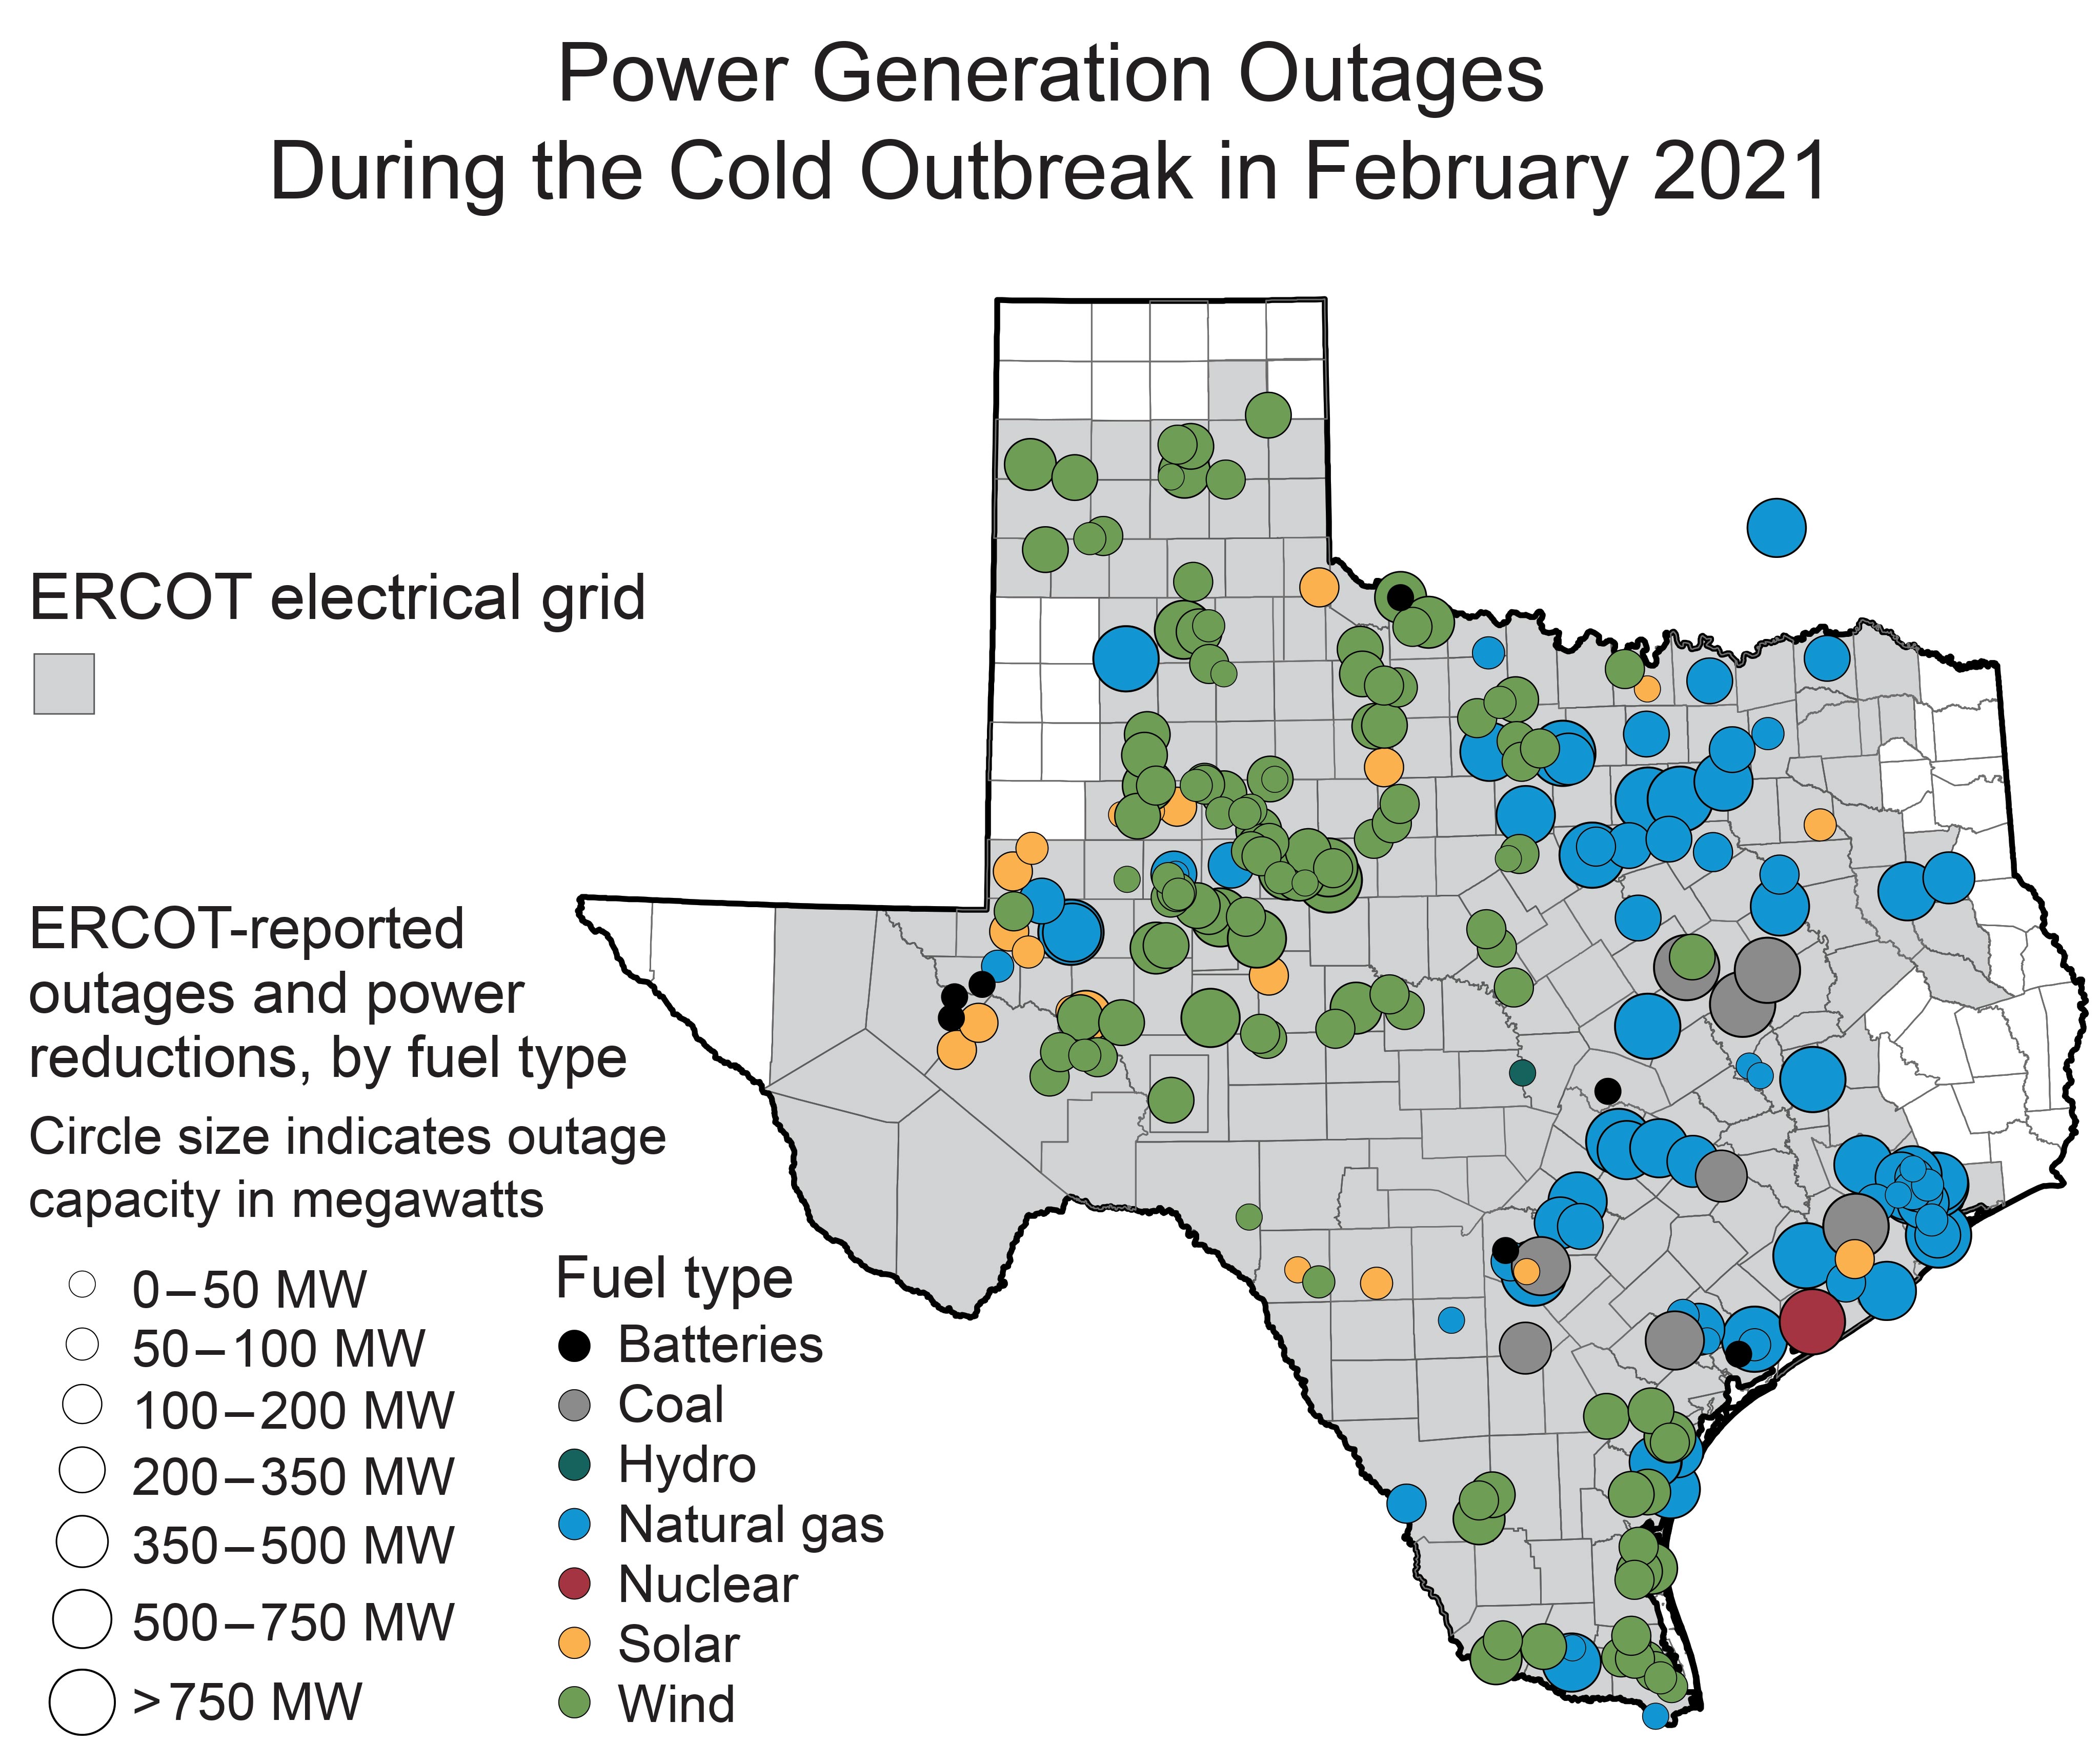 Power Generation Outages During the Cold Outbreak in February 2021